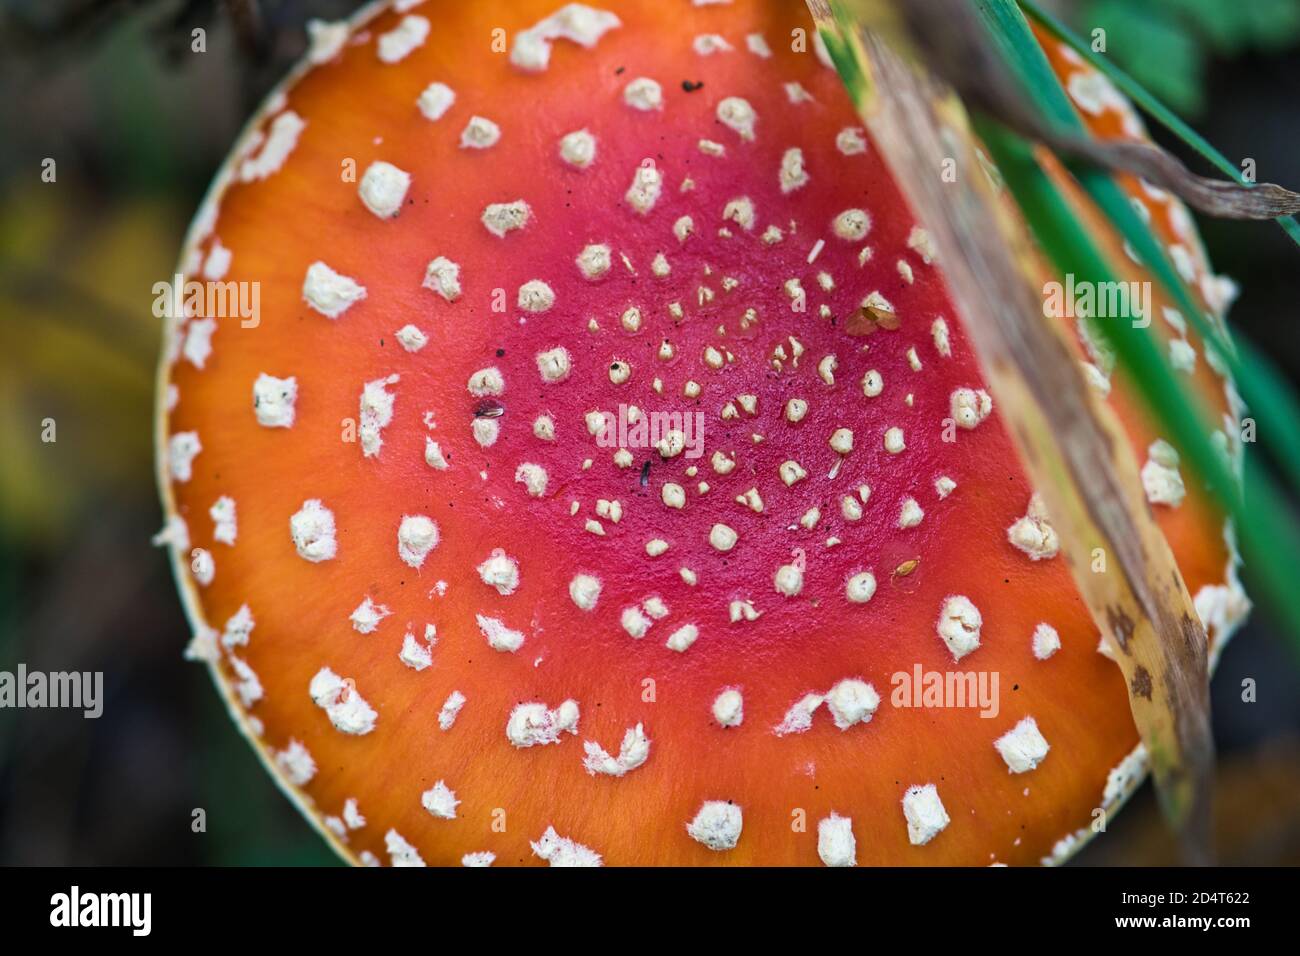 Fly agaric close up, amanita mushroom vibrant red hat with white dots web background autumn halloween Stock Photo